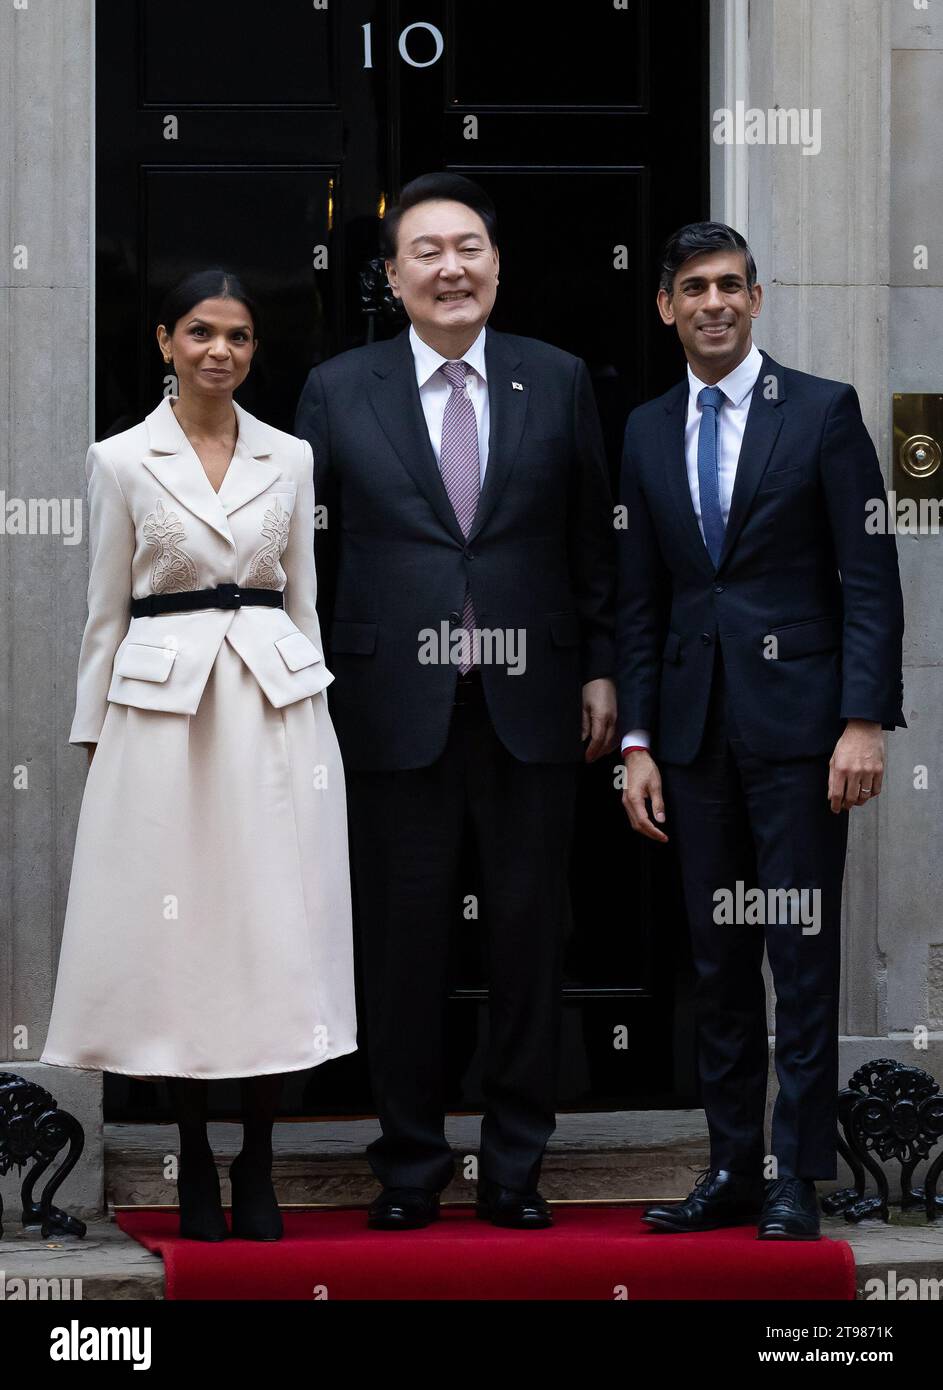 London, UK. 22nd Nov, 2023. British Prime Minister Rishi Sunak and wife Akshata Murthy greet the President of South Korea Yoon Suk Yeol outside 10 Downing Street in London ahead of a bilateral meeting. Credit: SOPA Images Limited/Alamy Live News Stock Photo